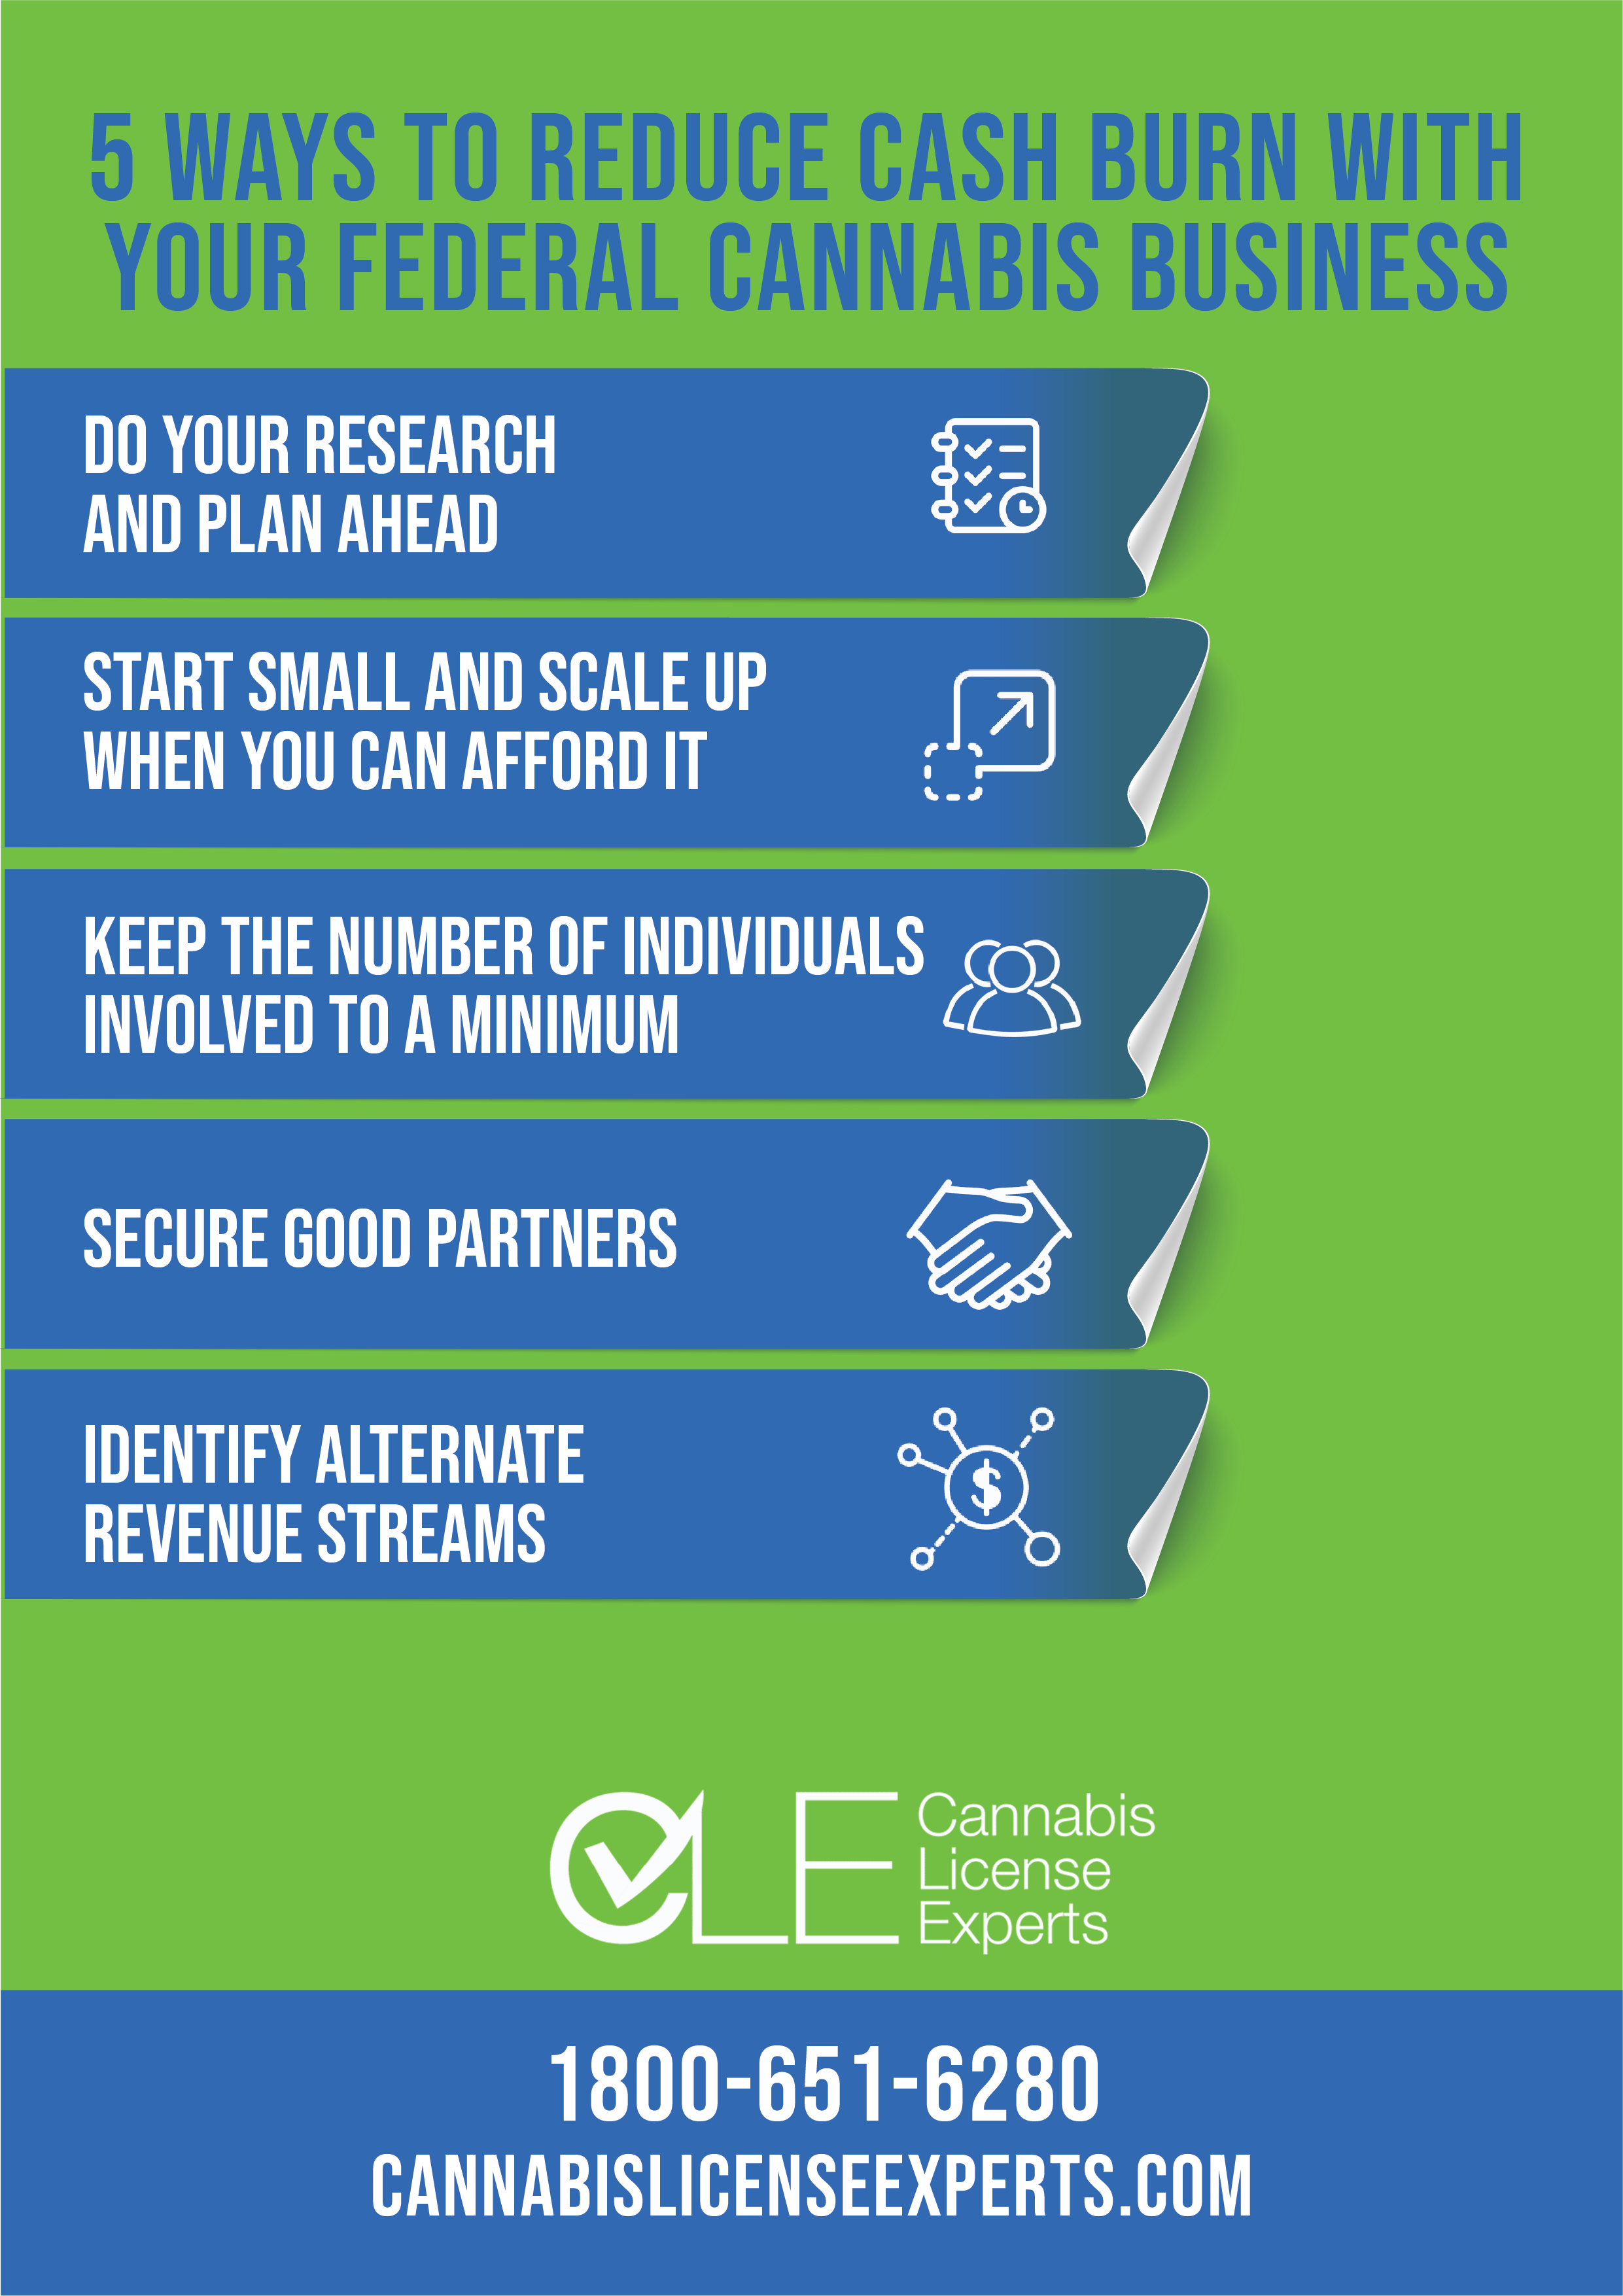 Reduce your cannabis business expenses